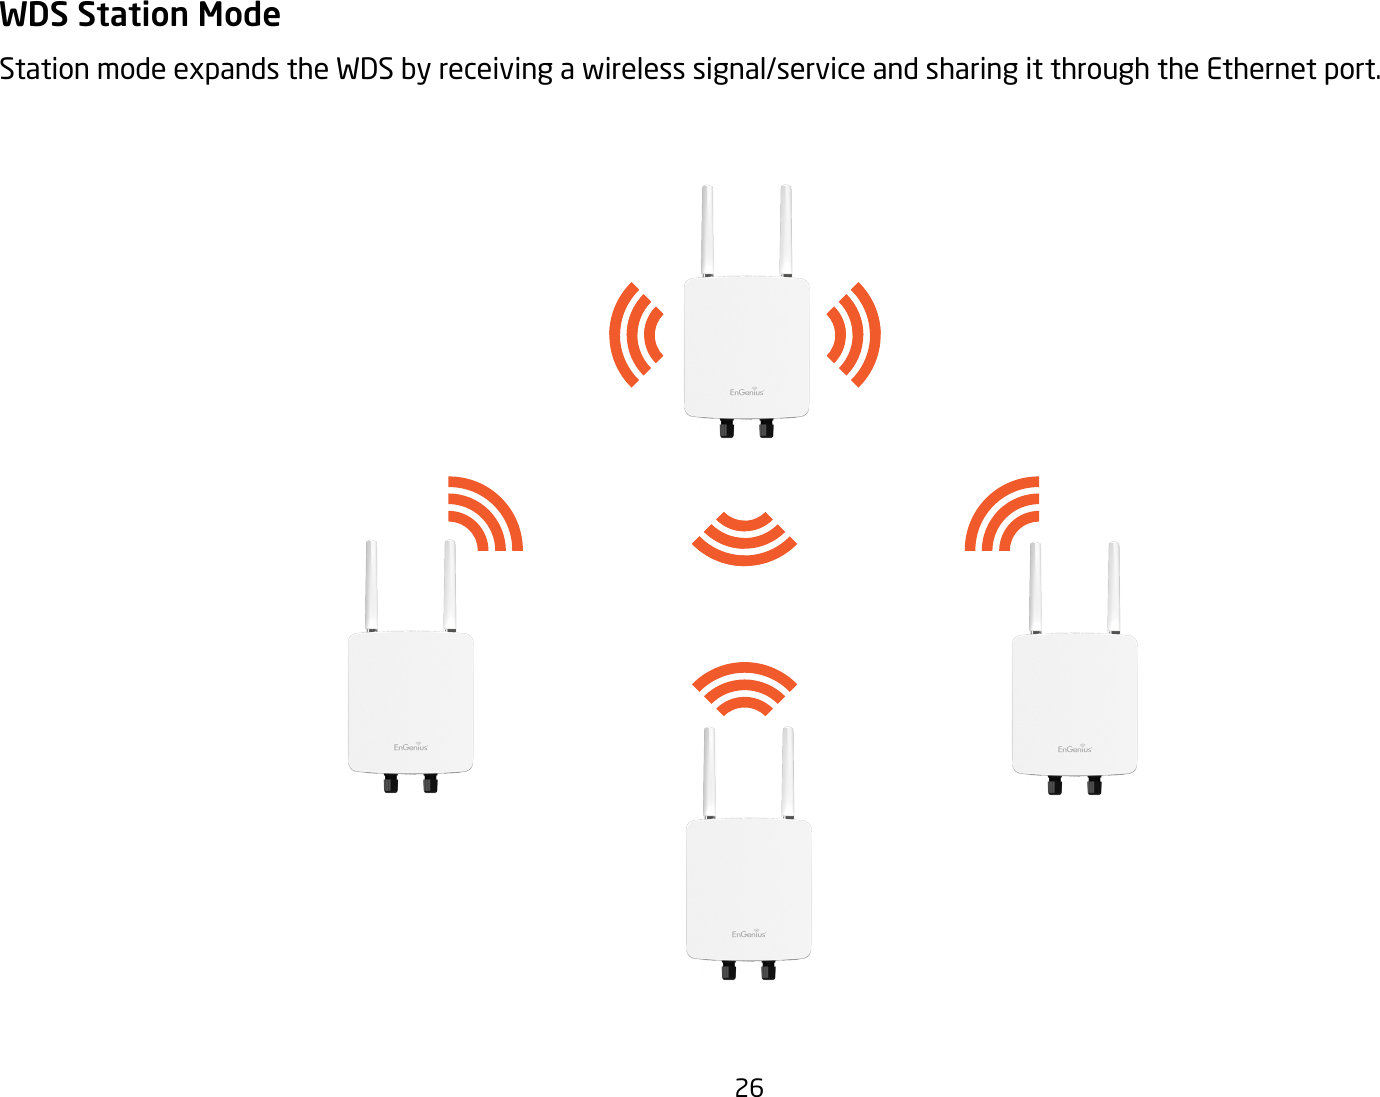 26WDS Station ModeStation mode expands the WDS by receiving a wireless signal/service and sharing it through the Ethernet port. 